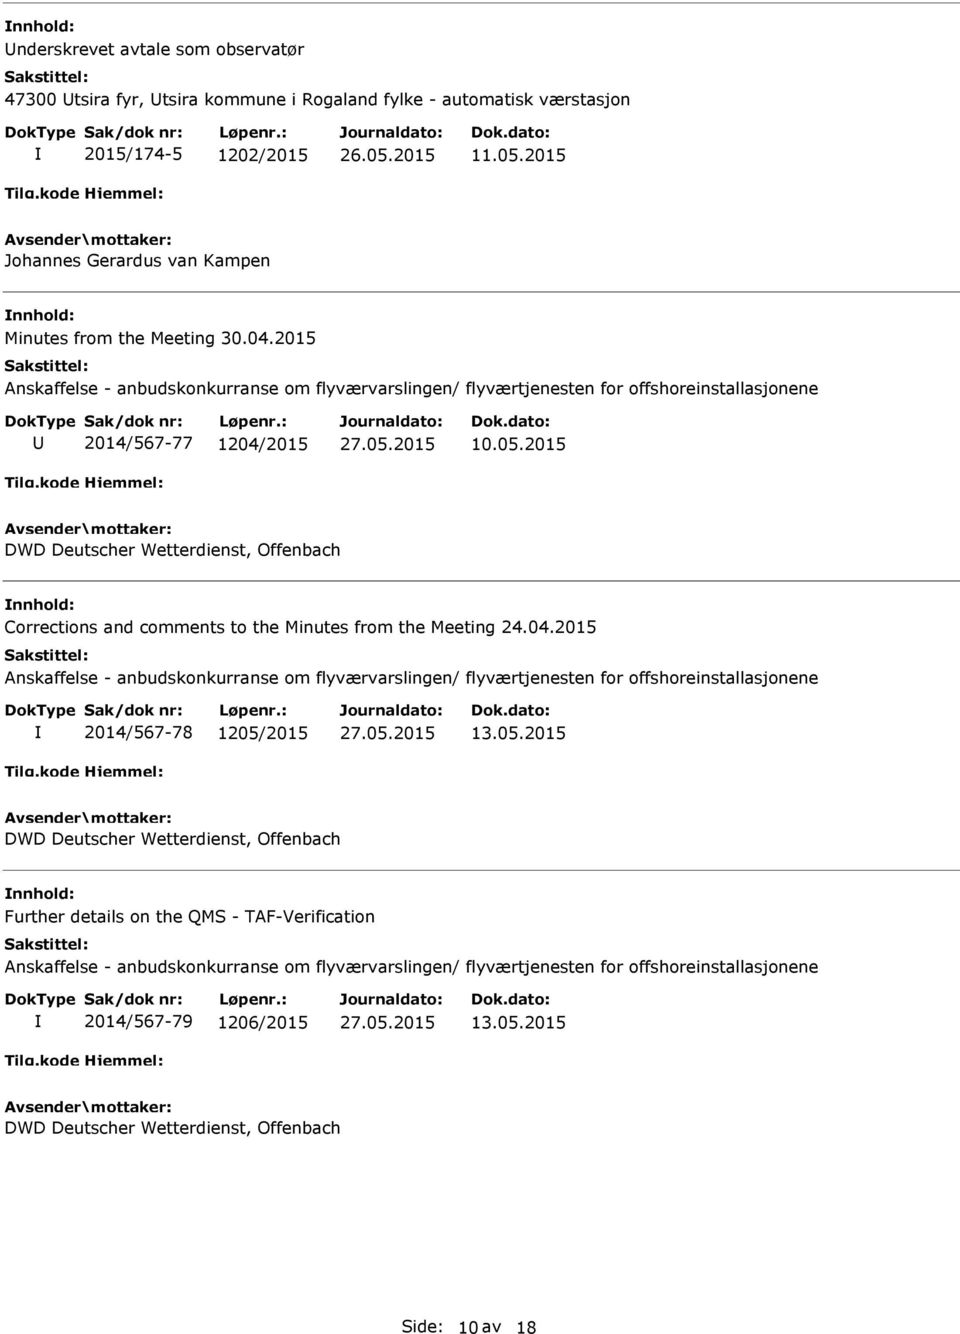 2015 DWD Deutscher Wetterdienst, Offenbach Corrections and comments to the Minutes from the Meeting 24.04.